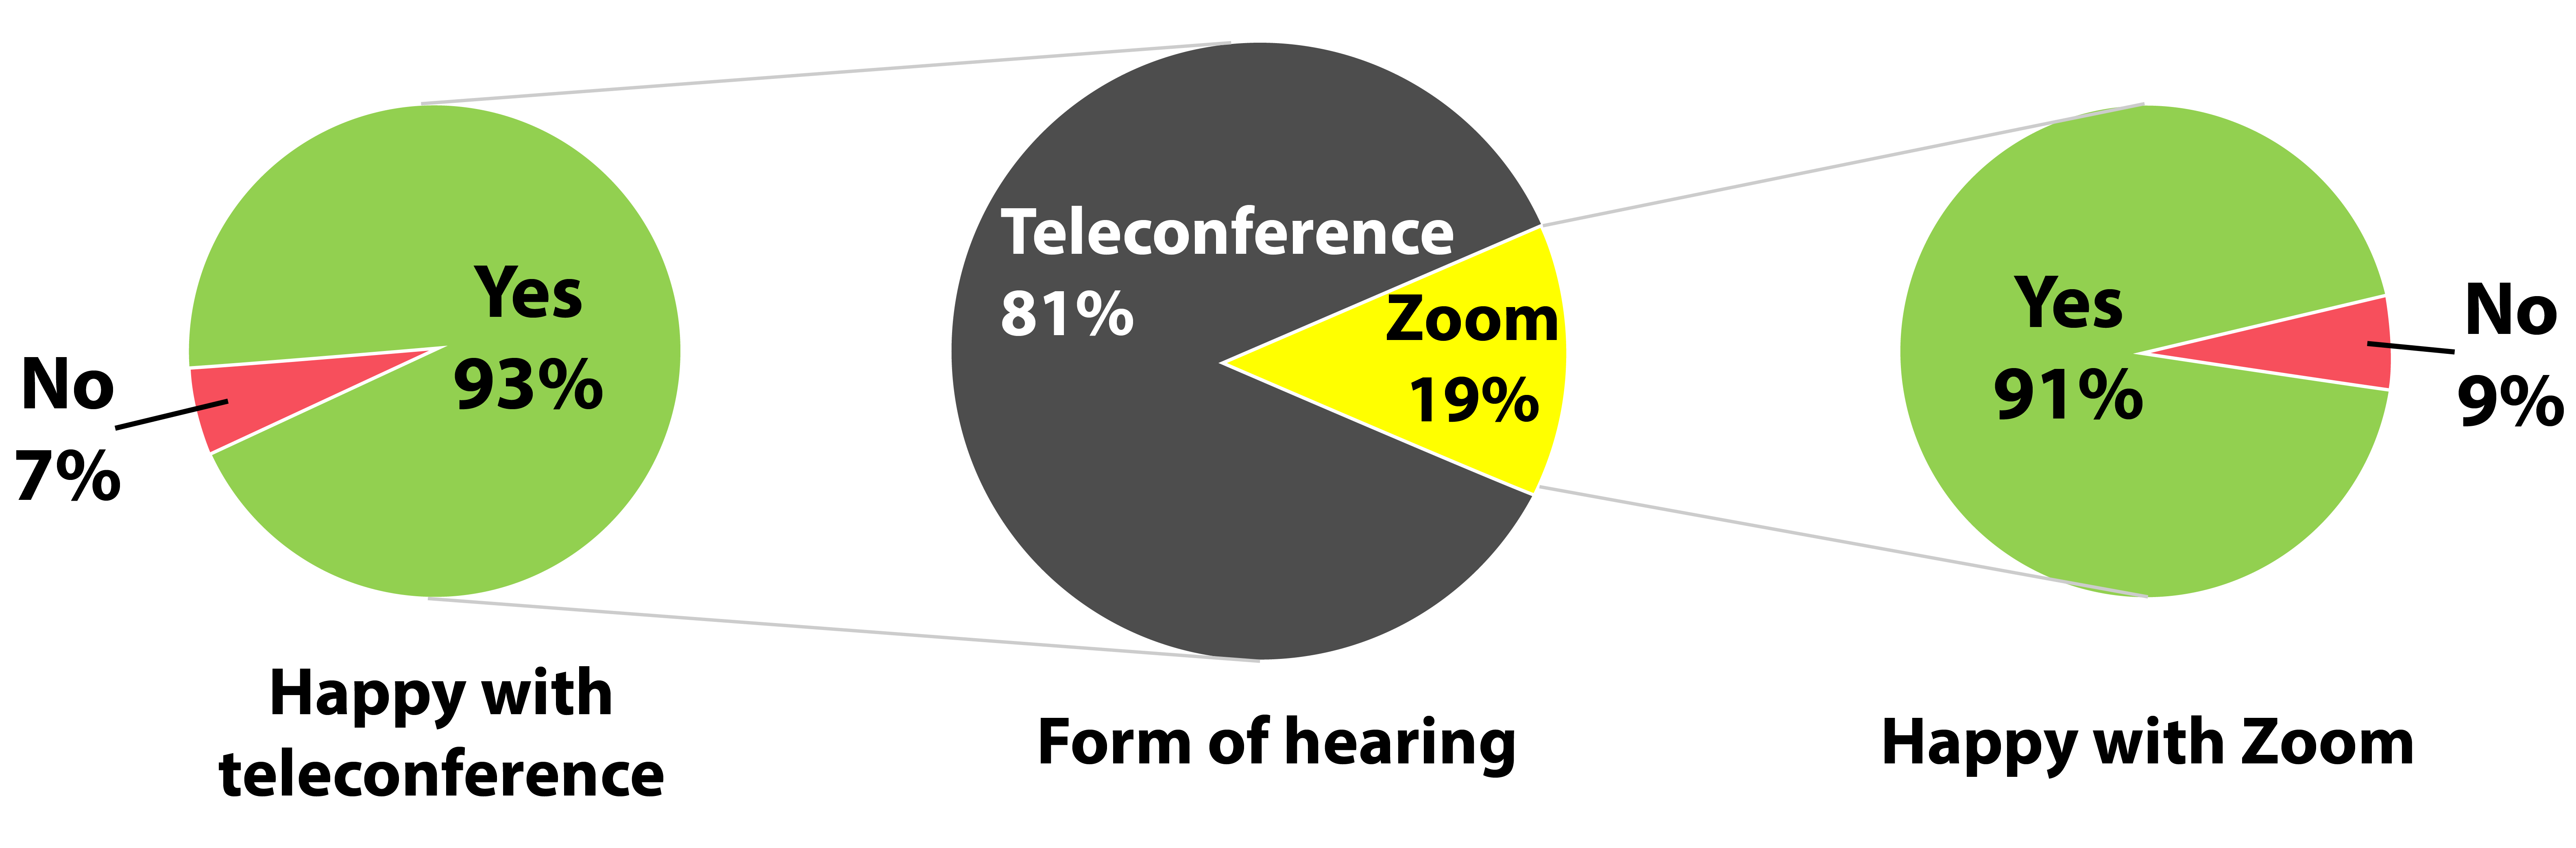 pie chart of teleconference and zoom percentages